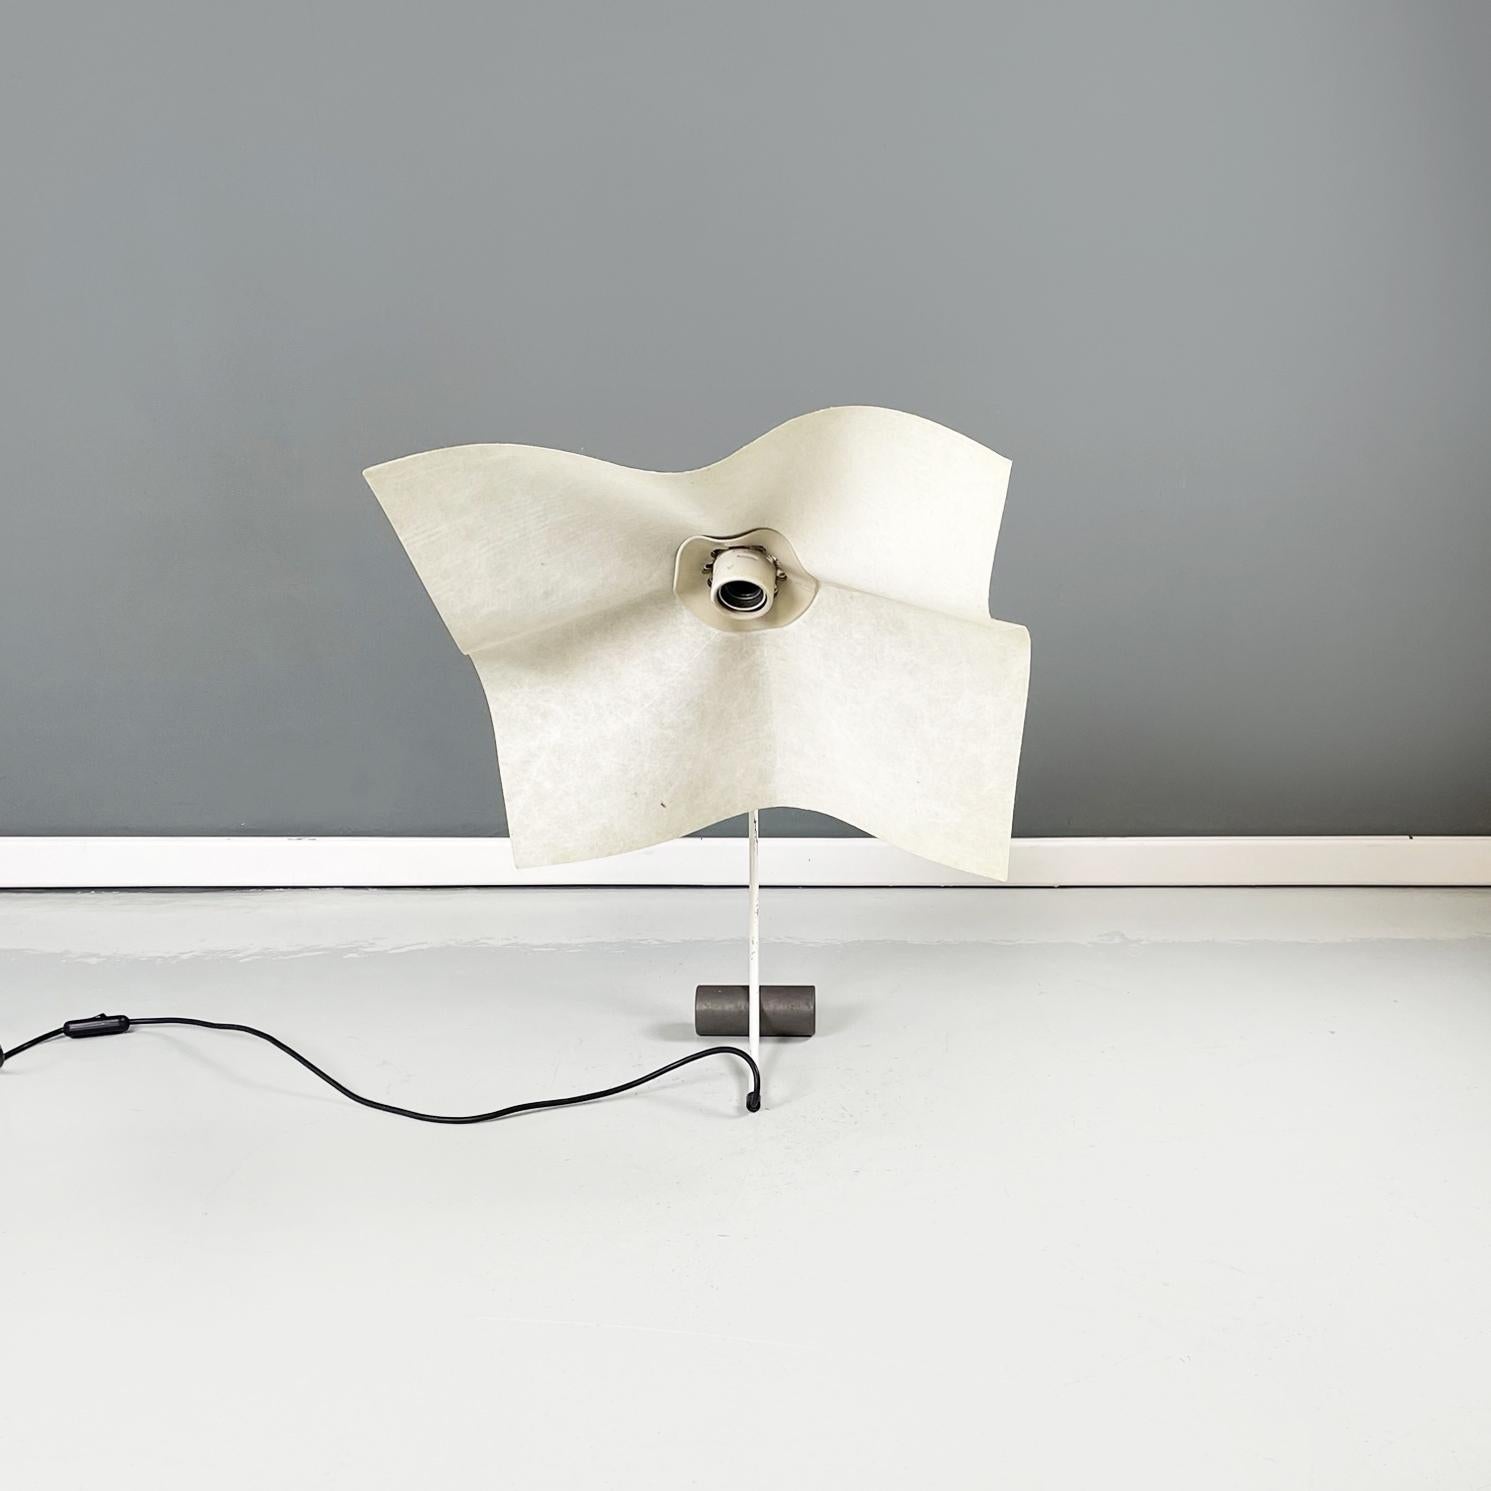 Italian modern cocoon table lamp area curva by Mario Bellini for Artemide, 1970s.
Table lamp mod. Area curva with lampshade with an irregular square shape curved in cocoon. The lampshade is adjustable. The central structure is made up of a curved